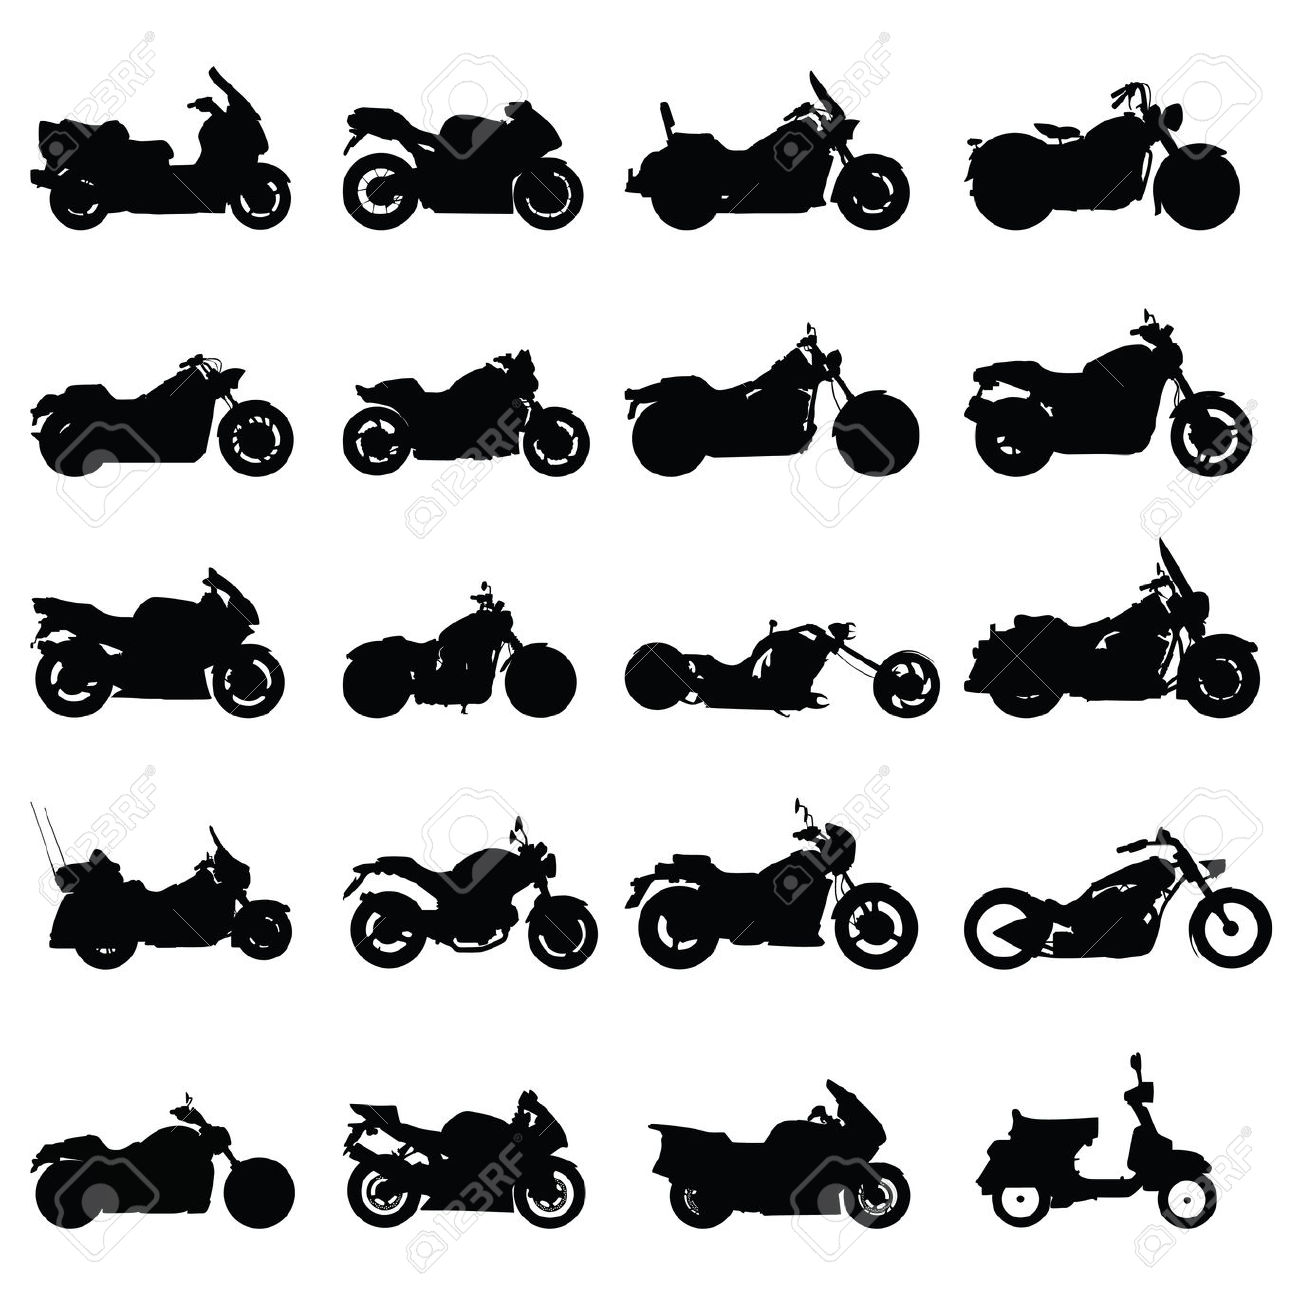 Harley silhouette clipart